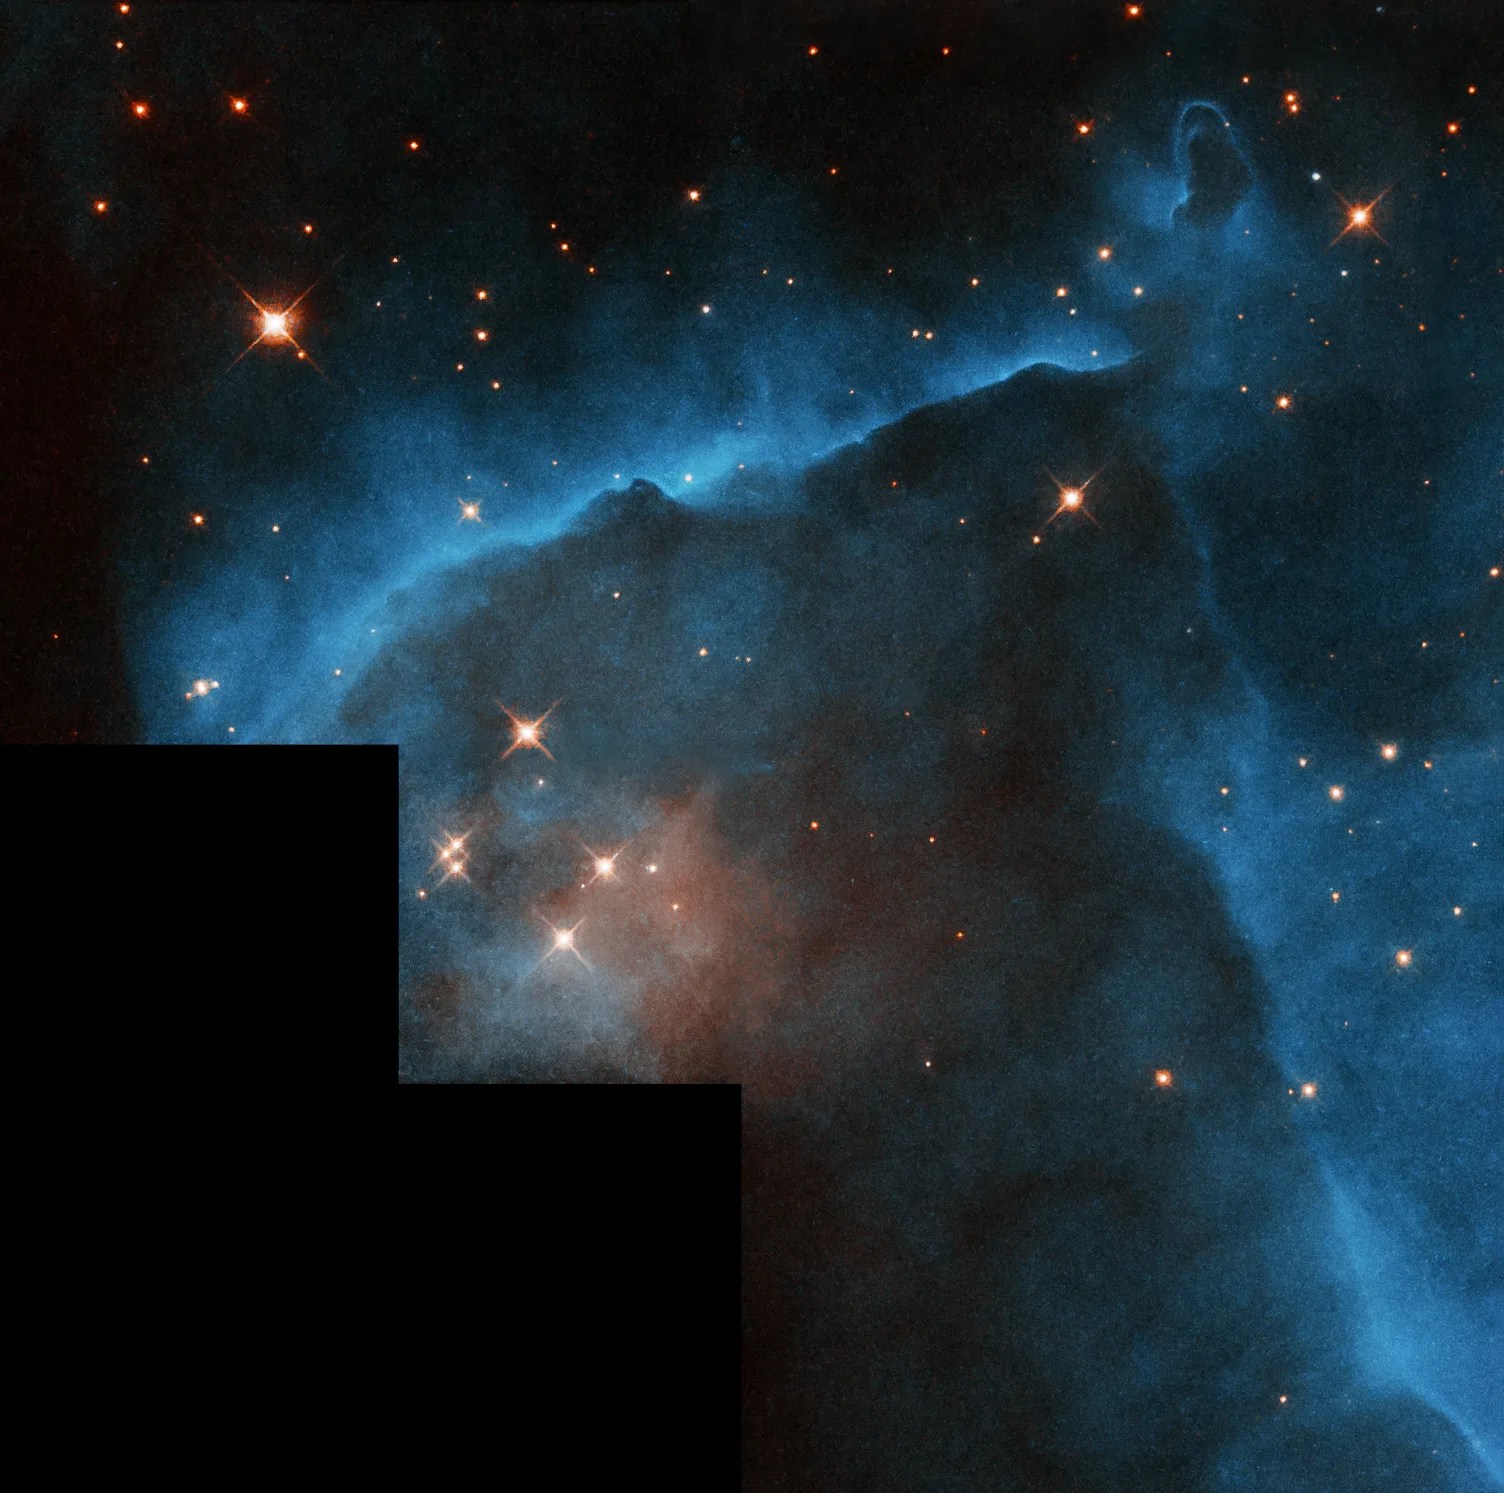 Large blue cloud of dust and gas forms a border around a grouping of yellow stars.